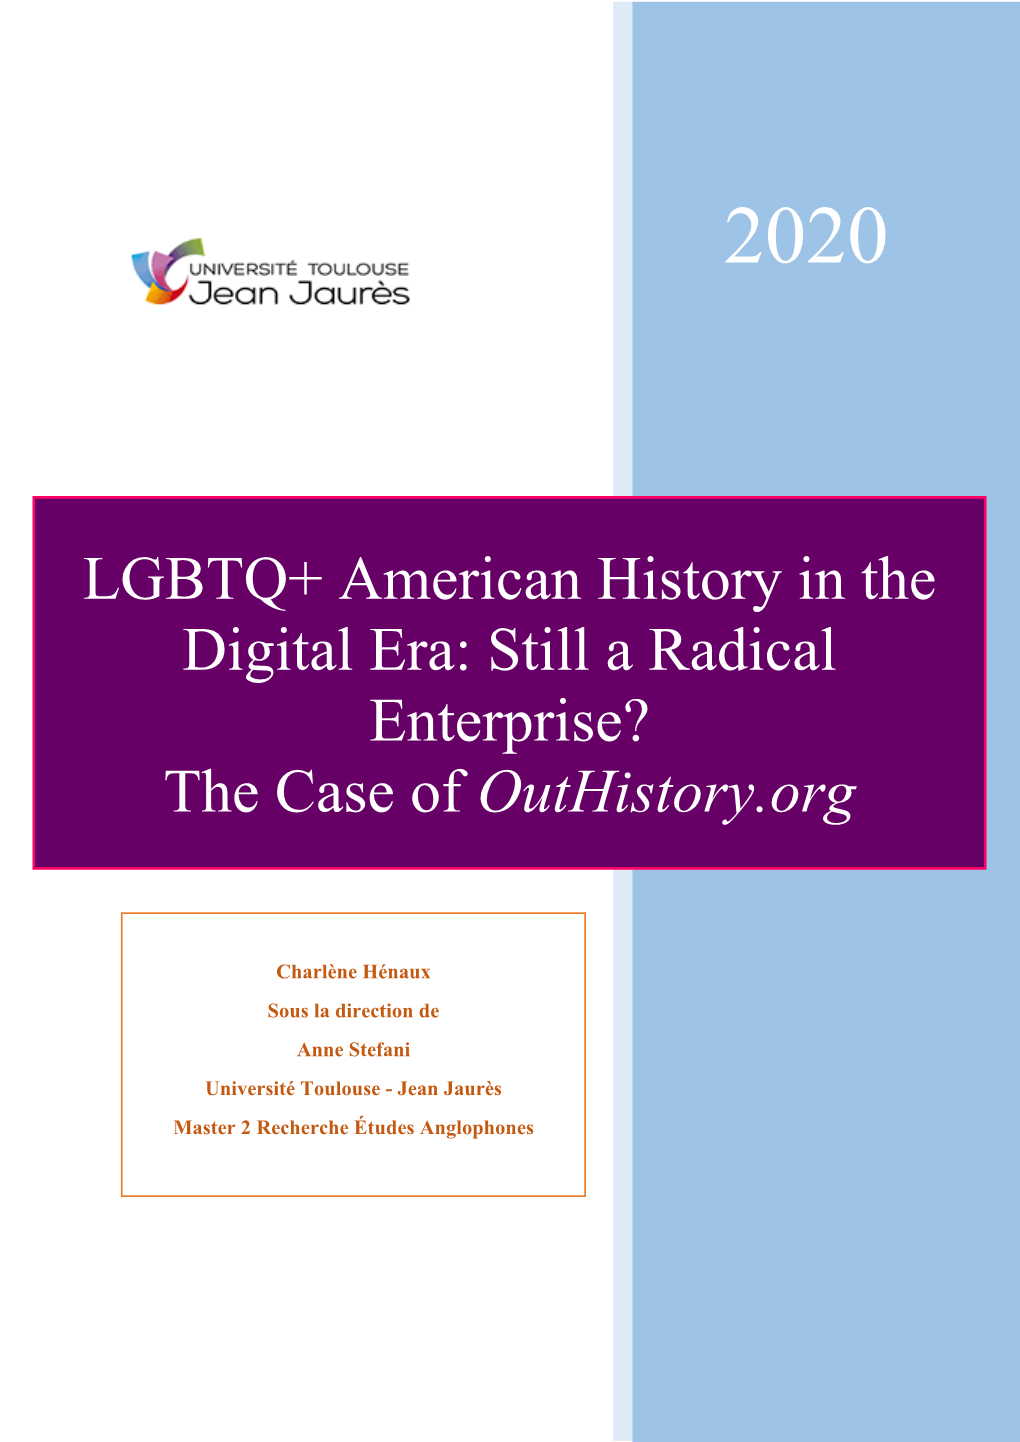 LGBTQ+ American History in the Digital Era: Still a Radical Enterprise? the Case of Outhistory.Org